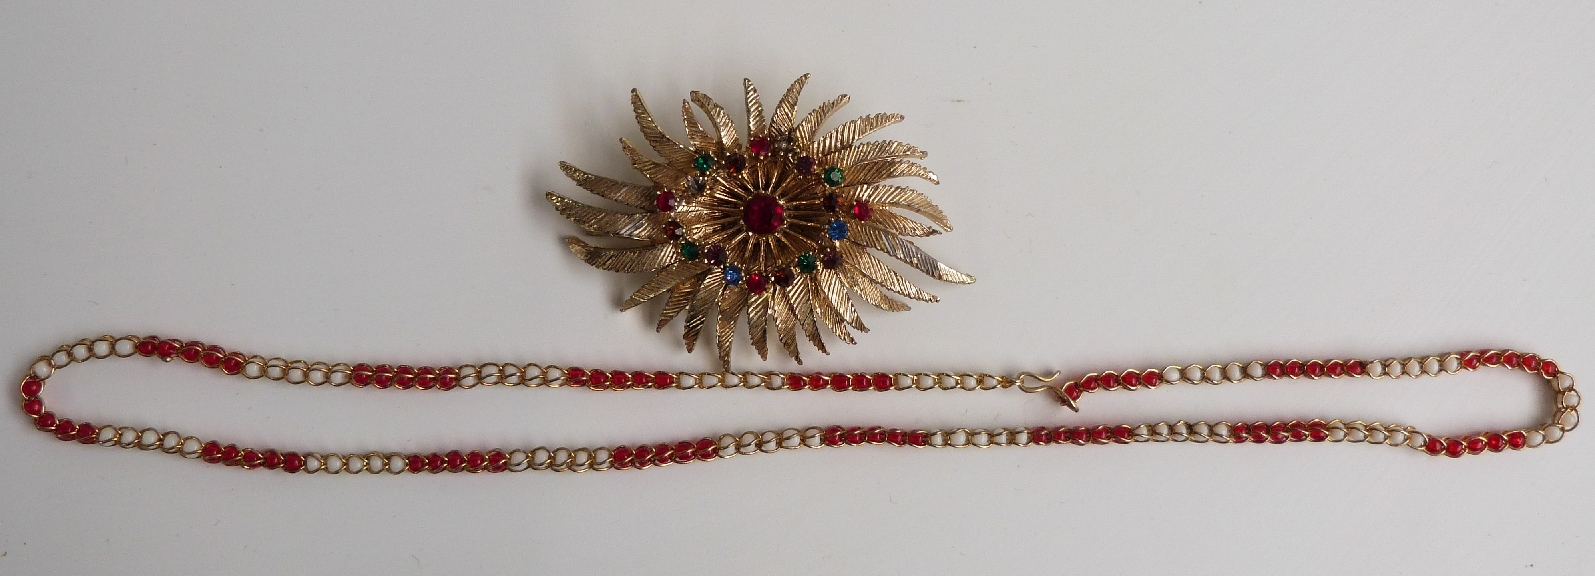 A collection of costume jewellery including a filigree brooch and necklace, two silver necklaces - Image 2 of 2